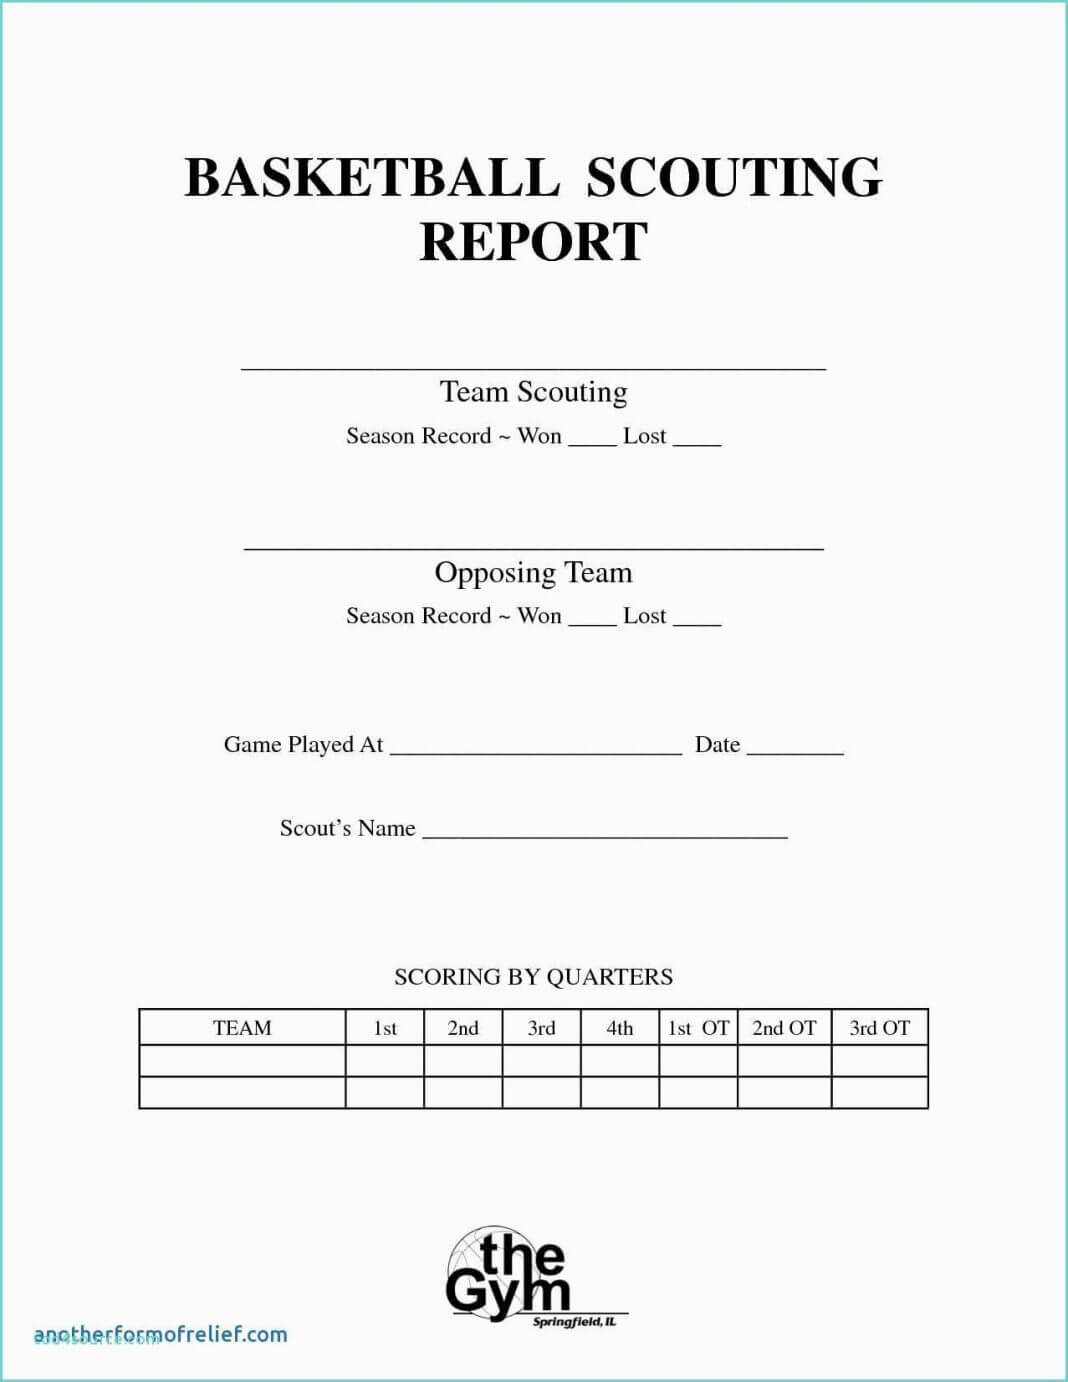 Ice Hockey Ting Report Template Football Defensive Soccer For Basketball Player Scouting Report Template